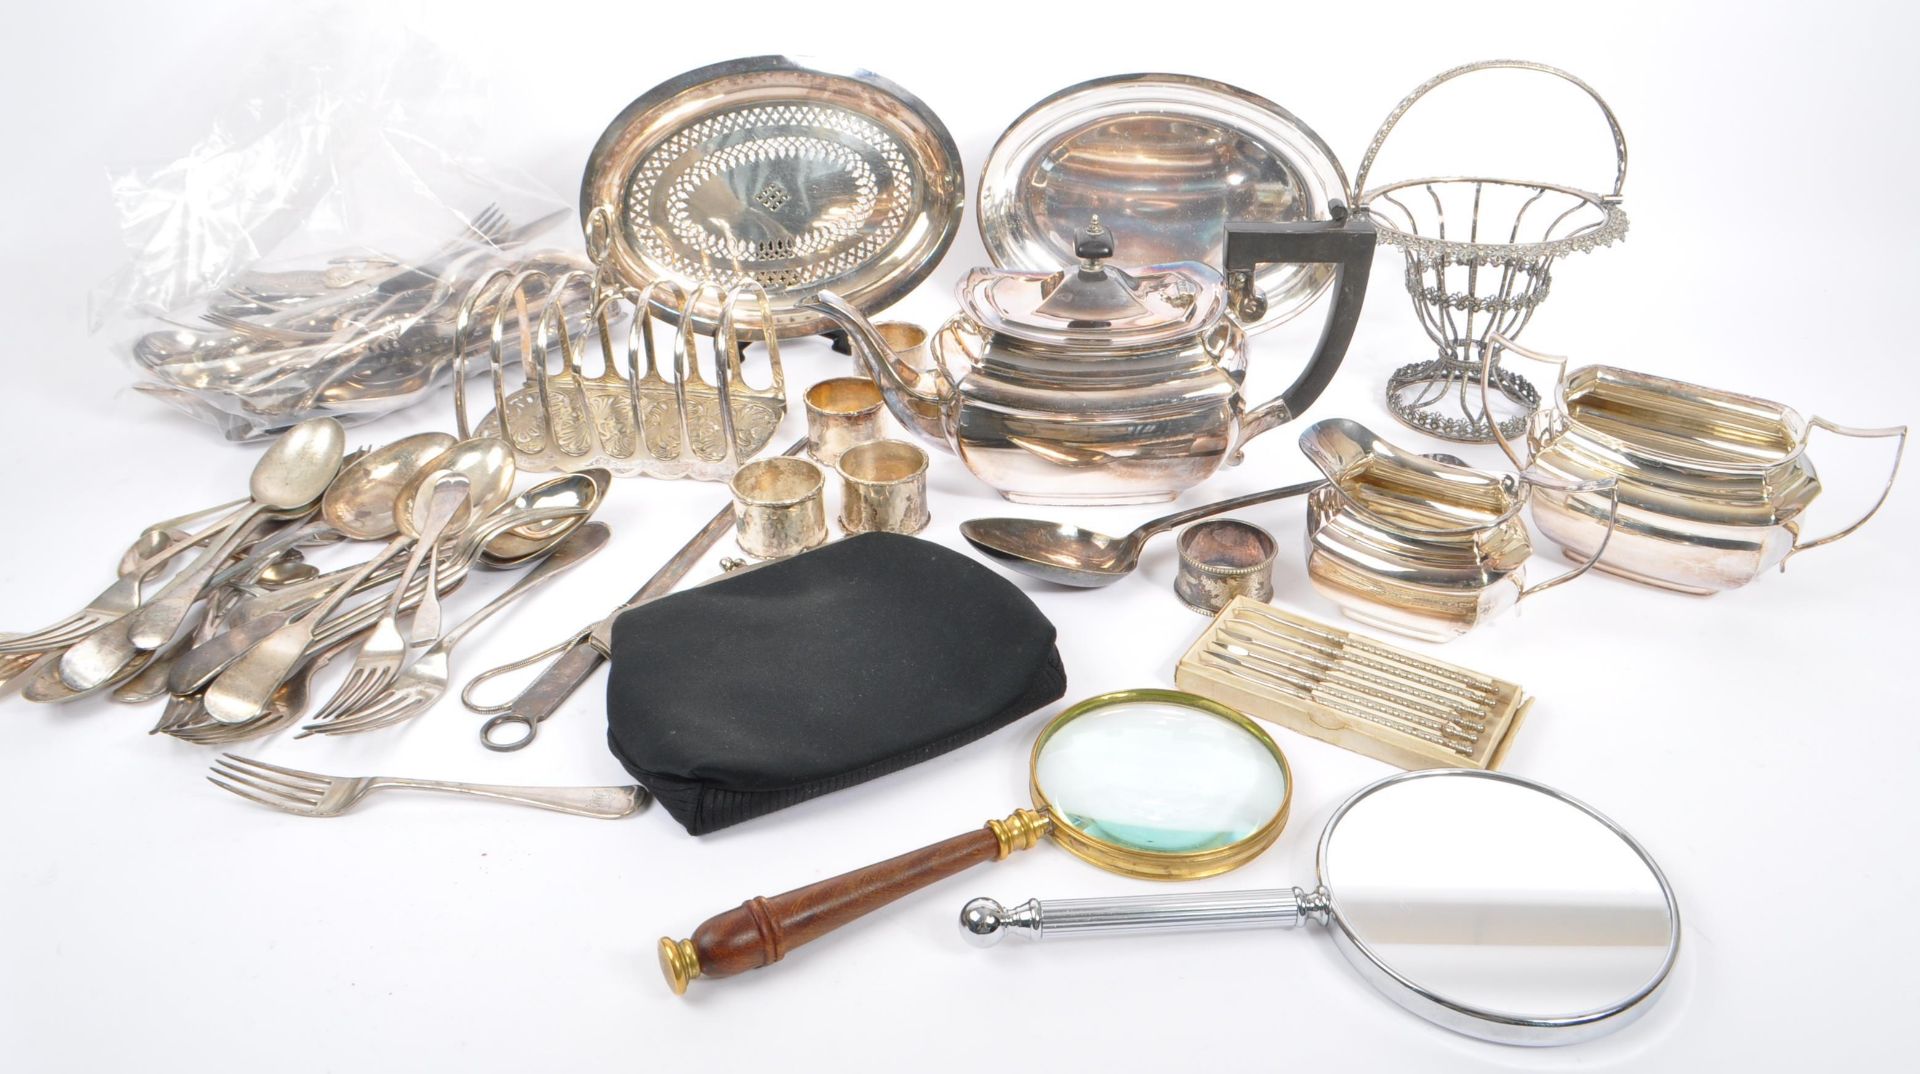 COLLECTION OF 20TH CENTURY SILVER PLATE ITEMS